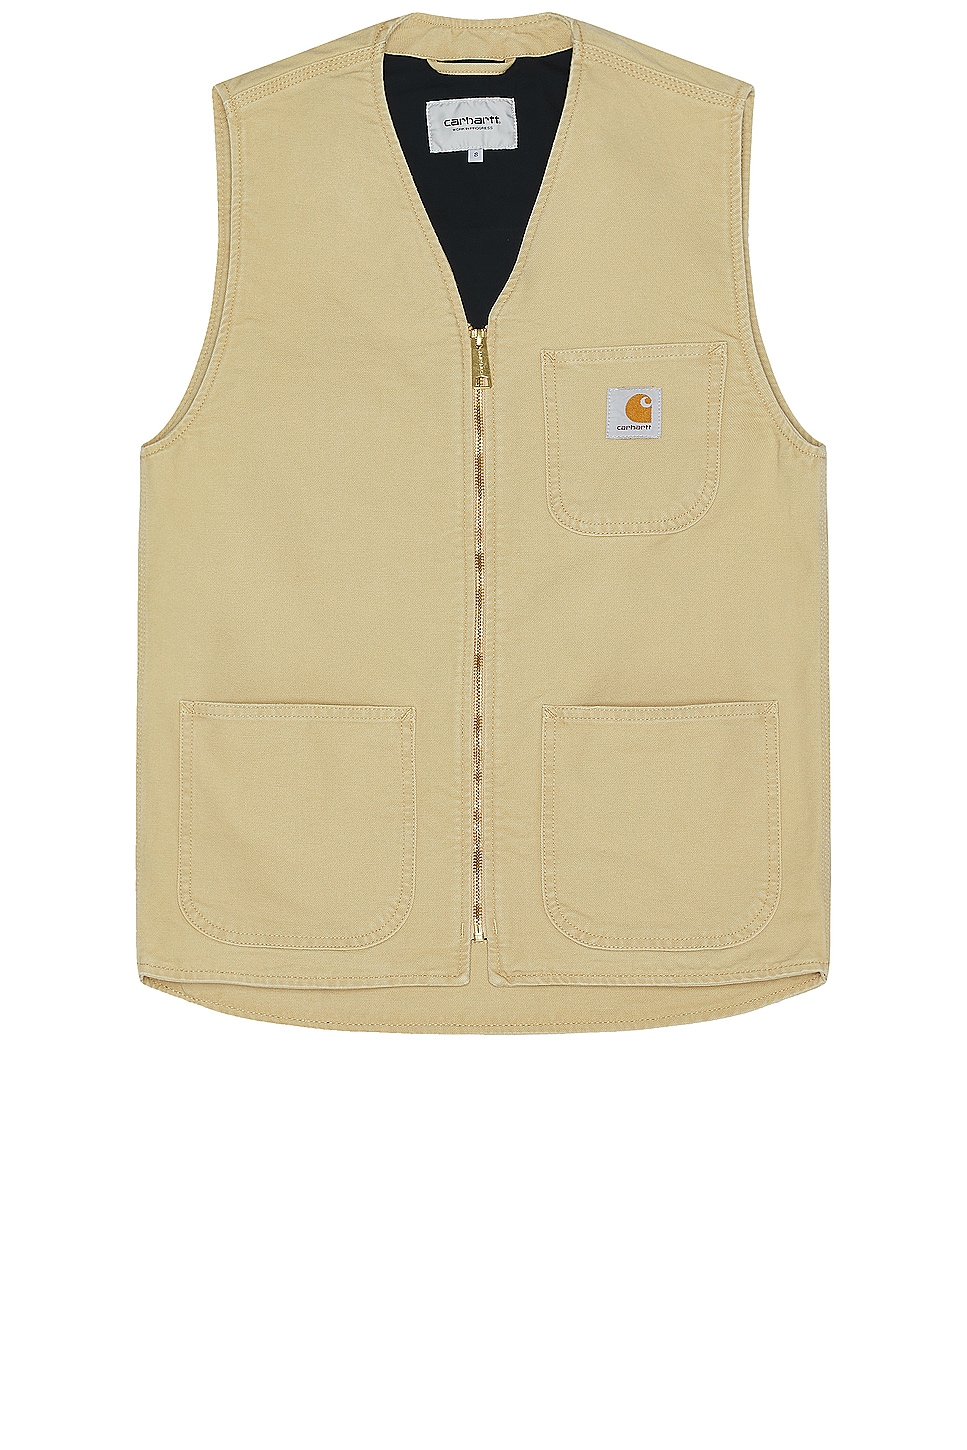 Image 1 of Carhartt WIP Arbor Vest in Bourbon Aged Canvas